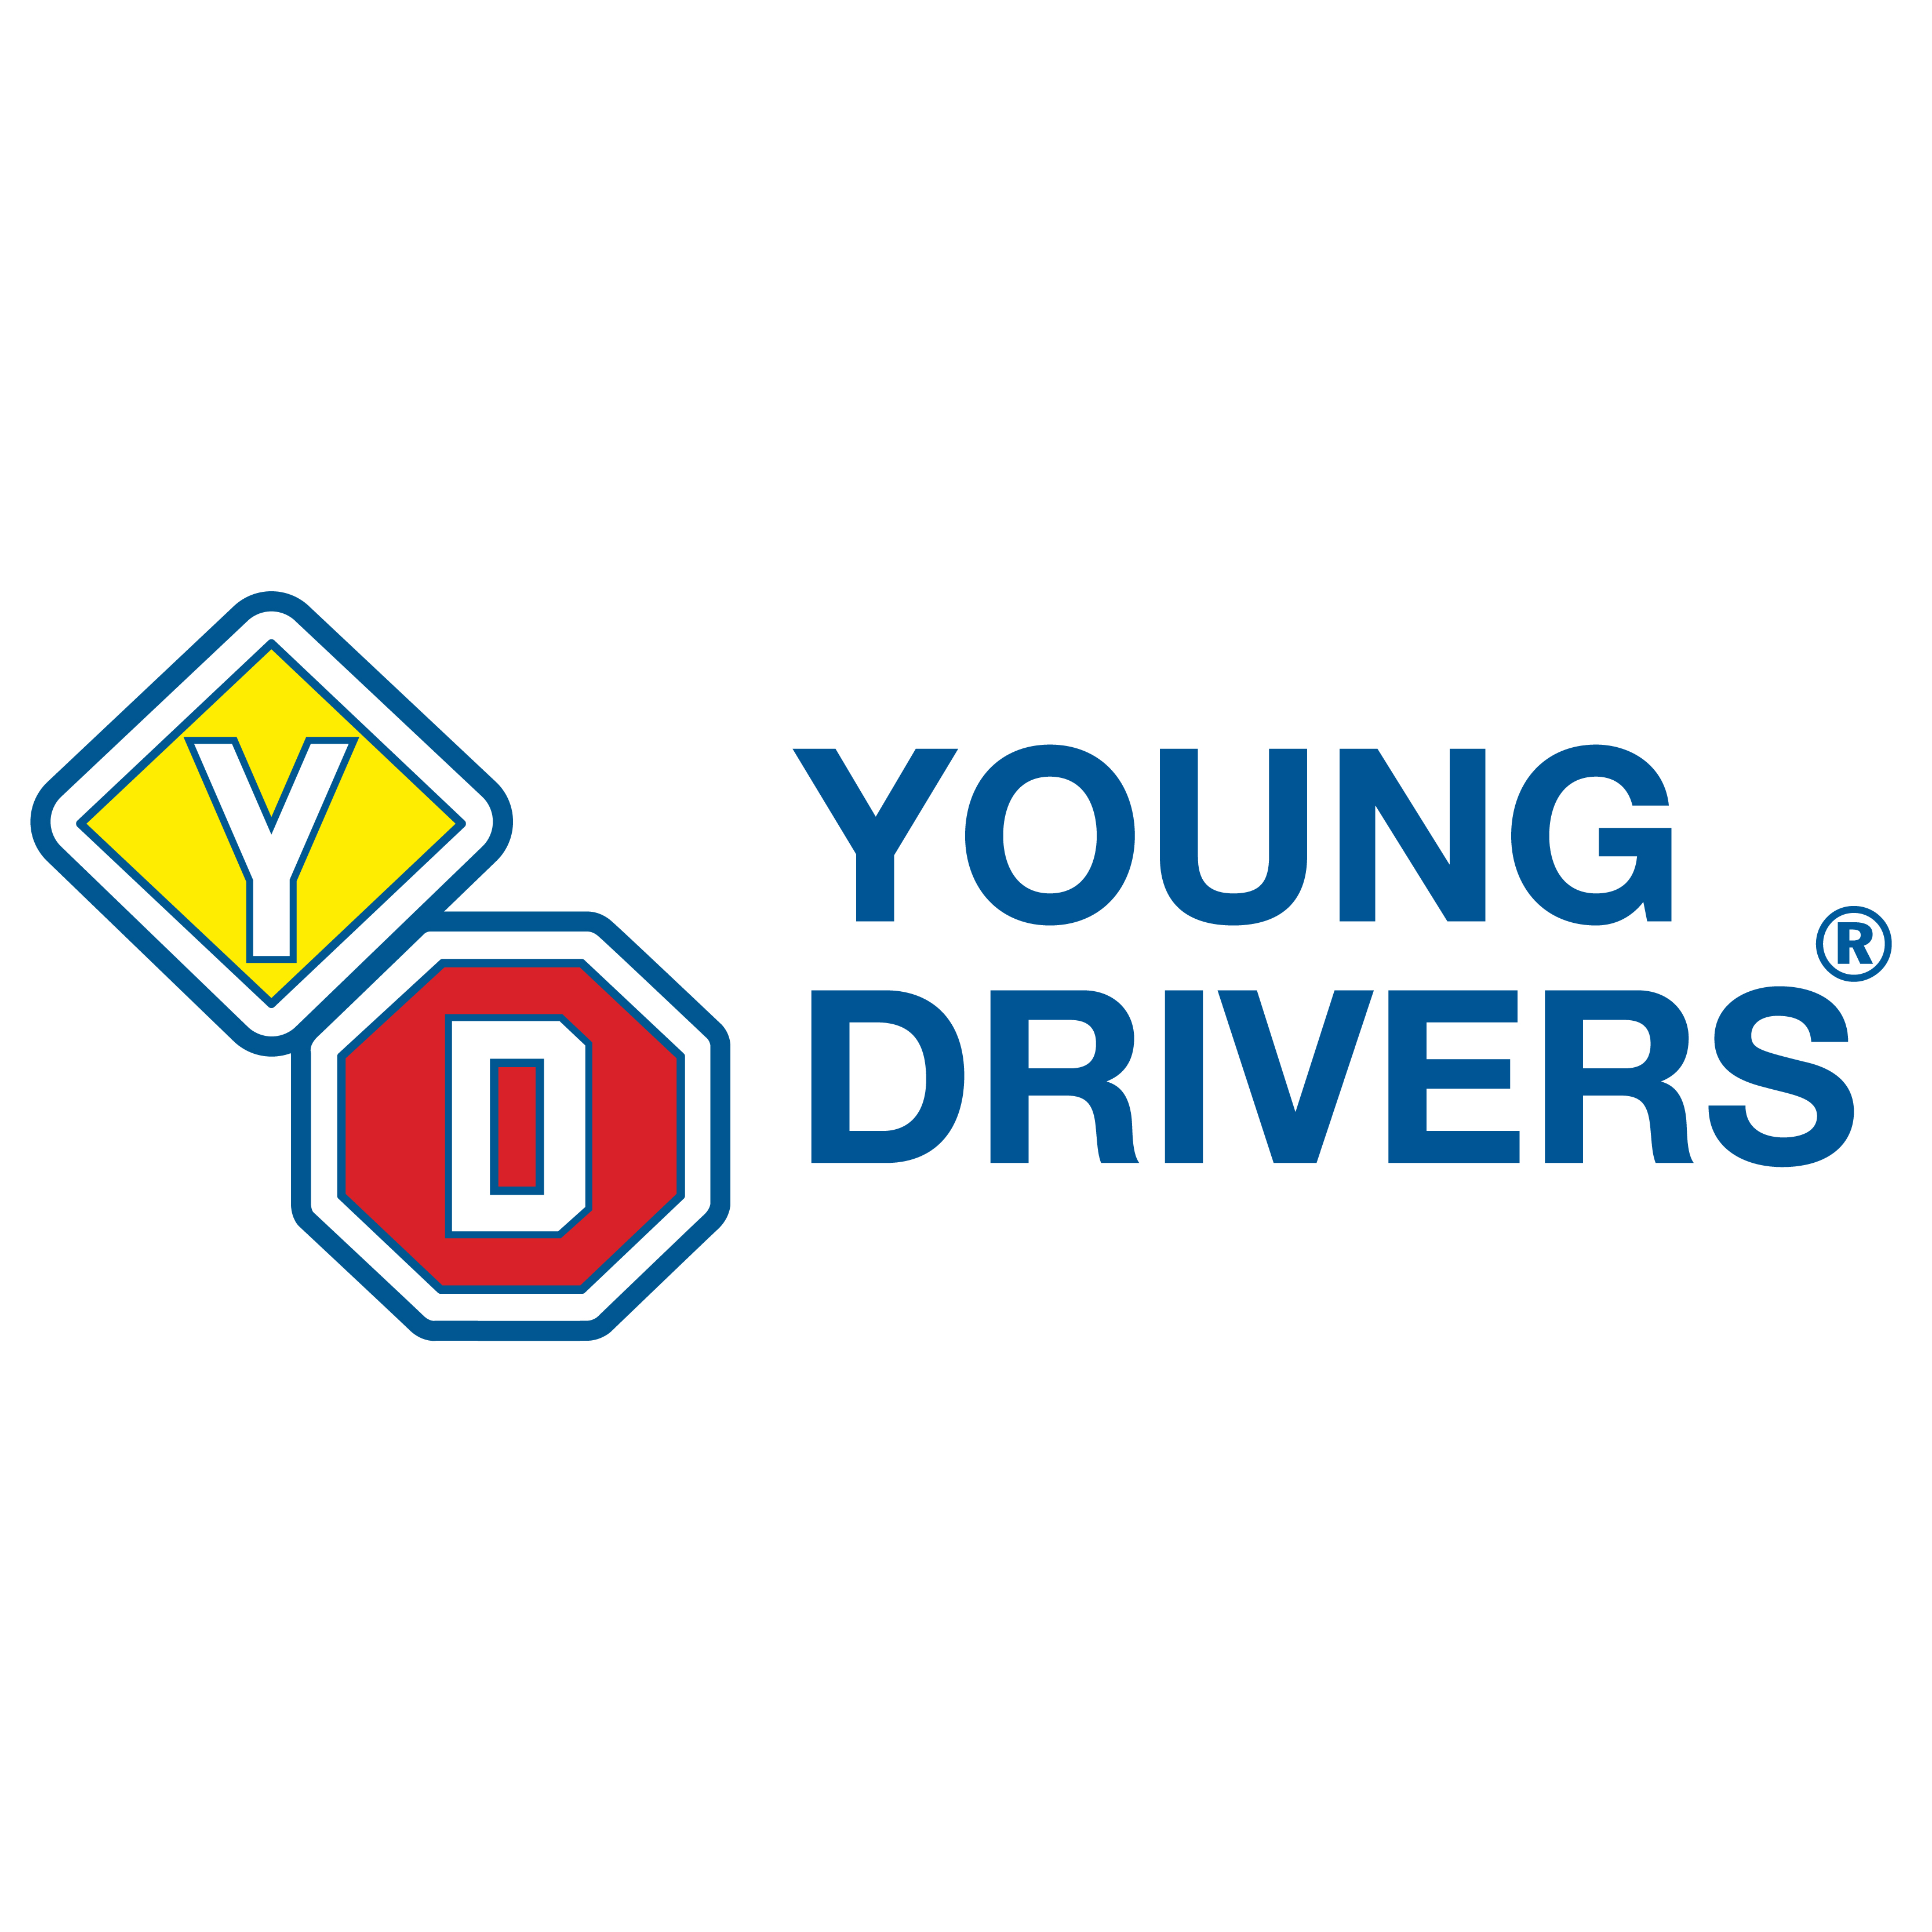 Young drivers of Canada